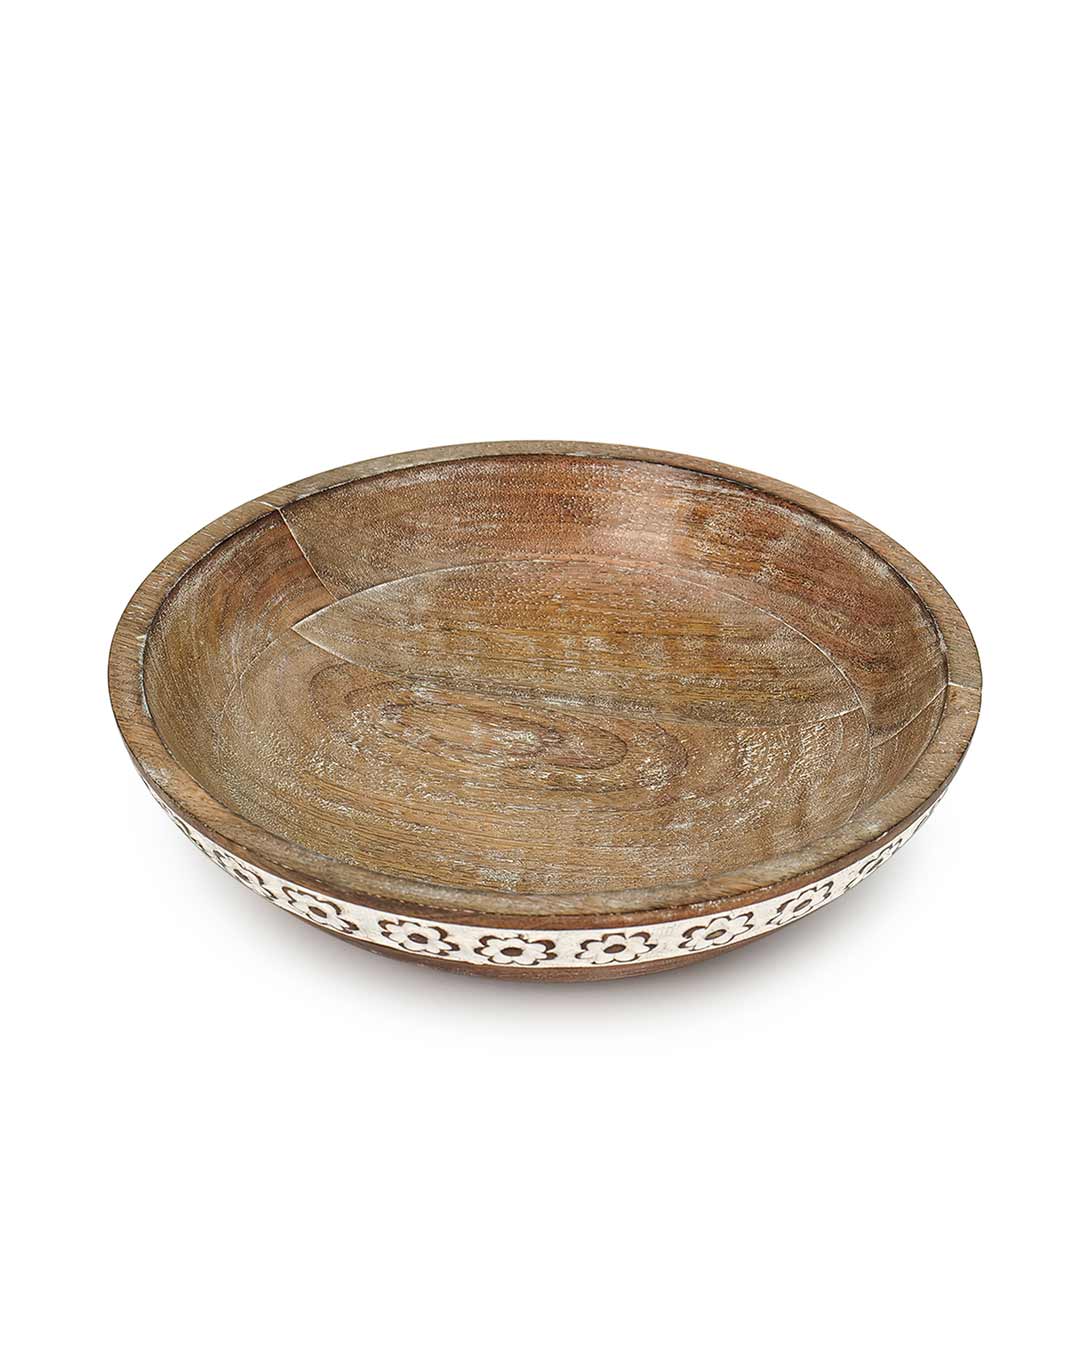 Flower Crafted Wooden Bowl